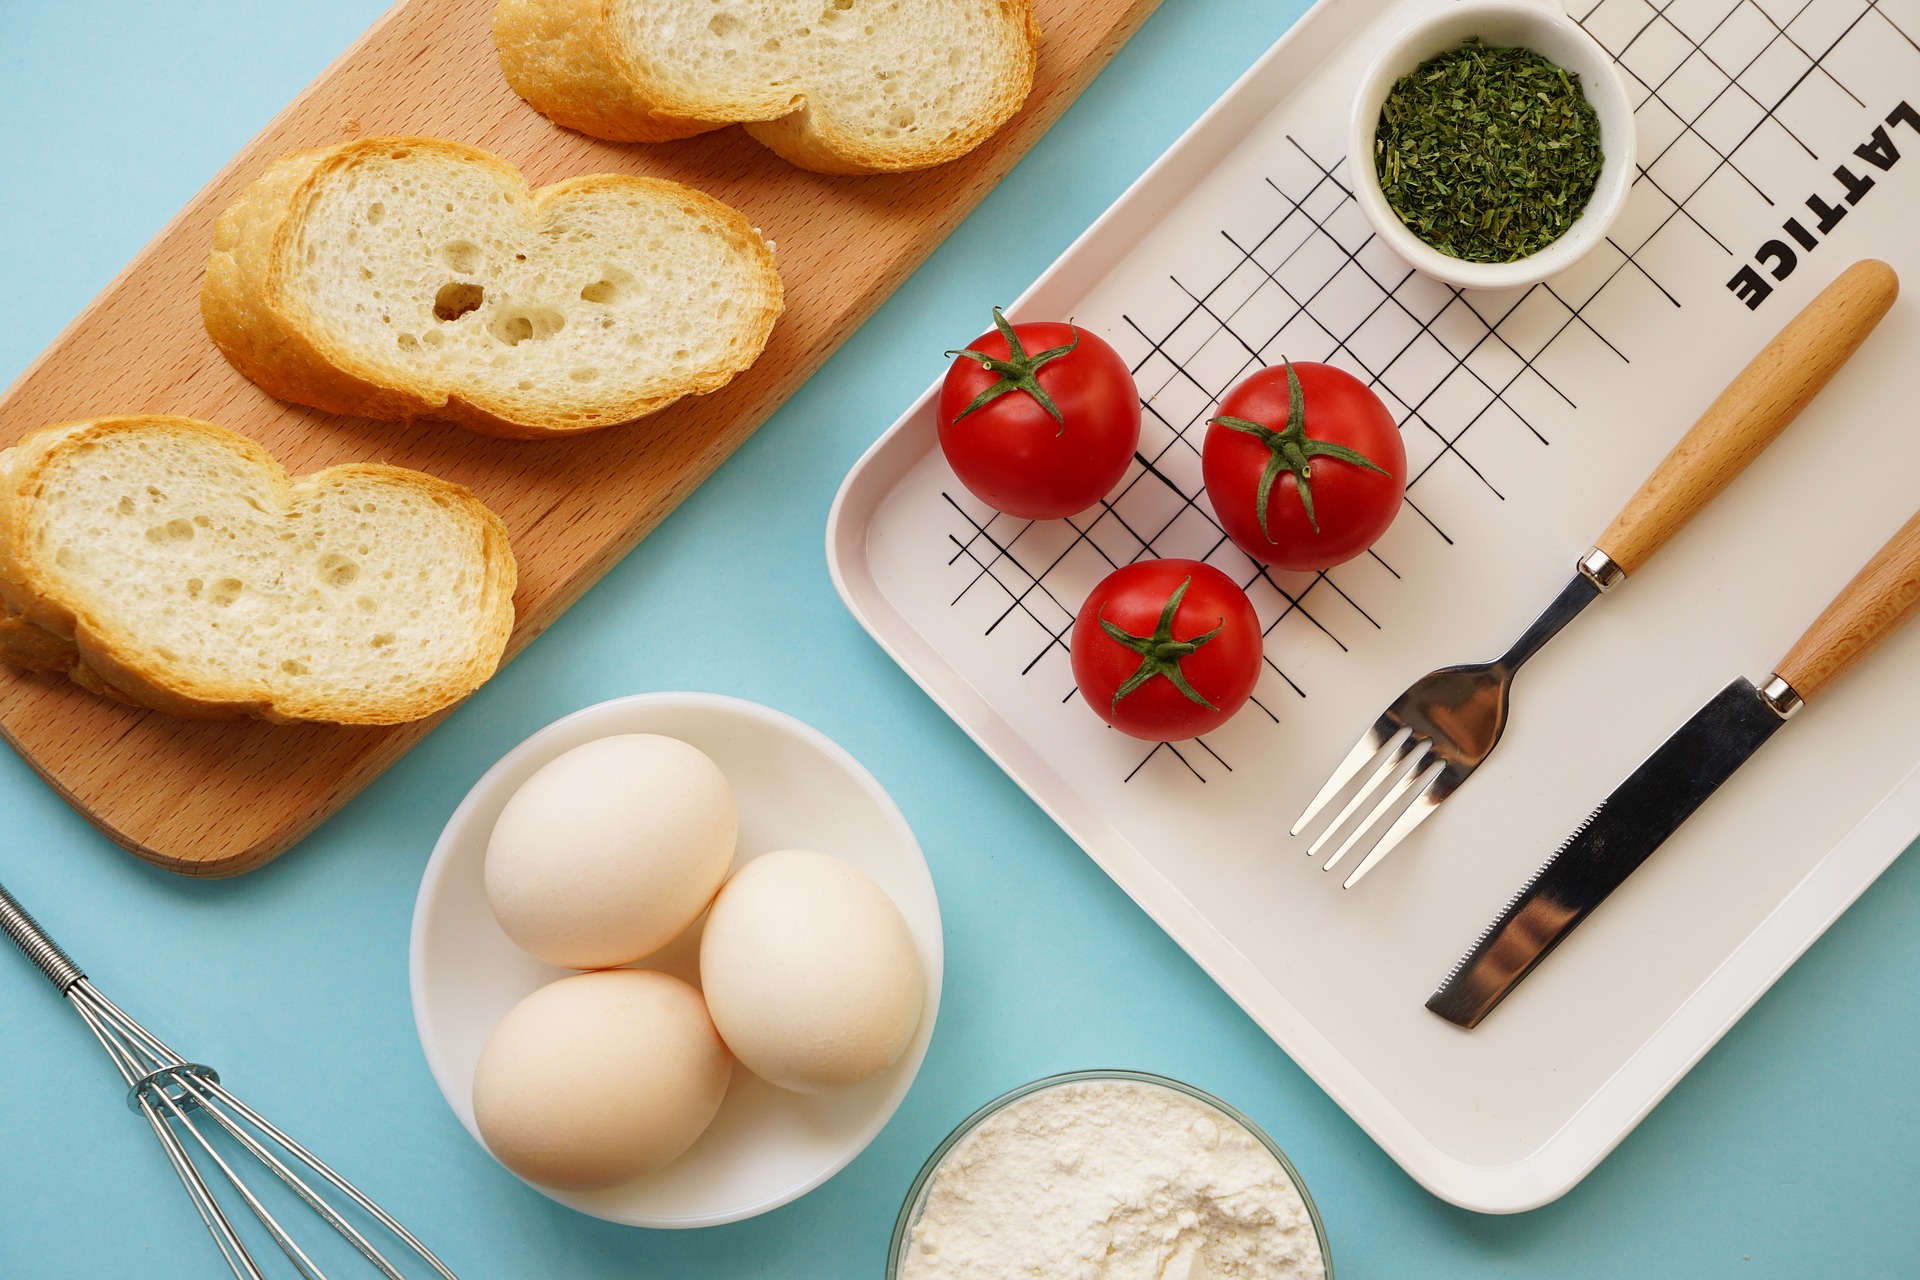 Baguette, eggs, and tomatoes with serving tray on blue table